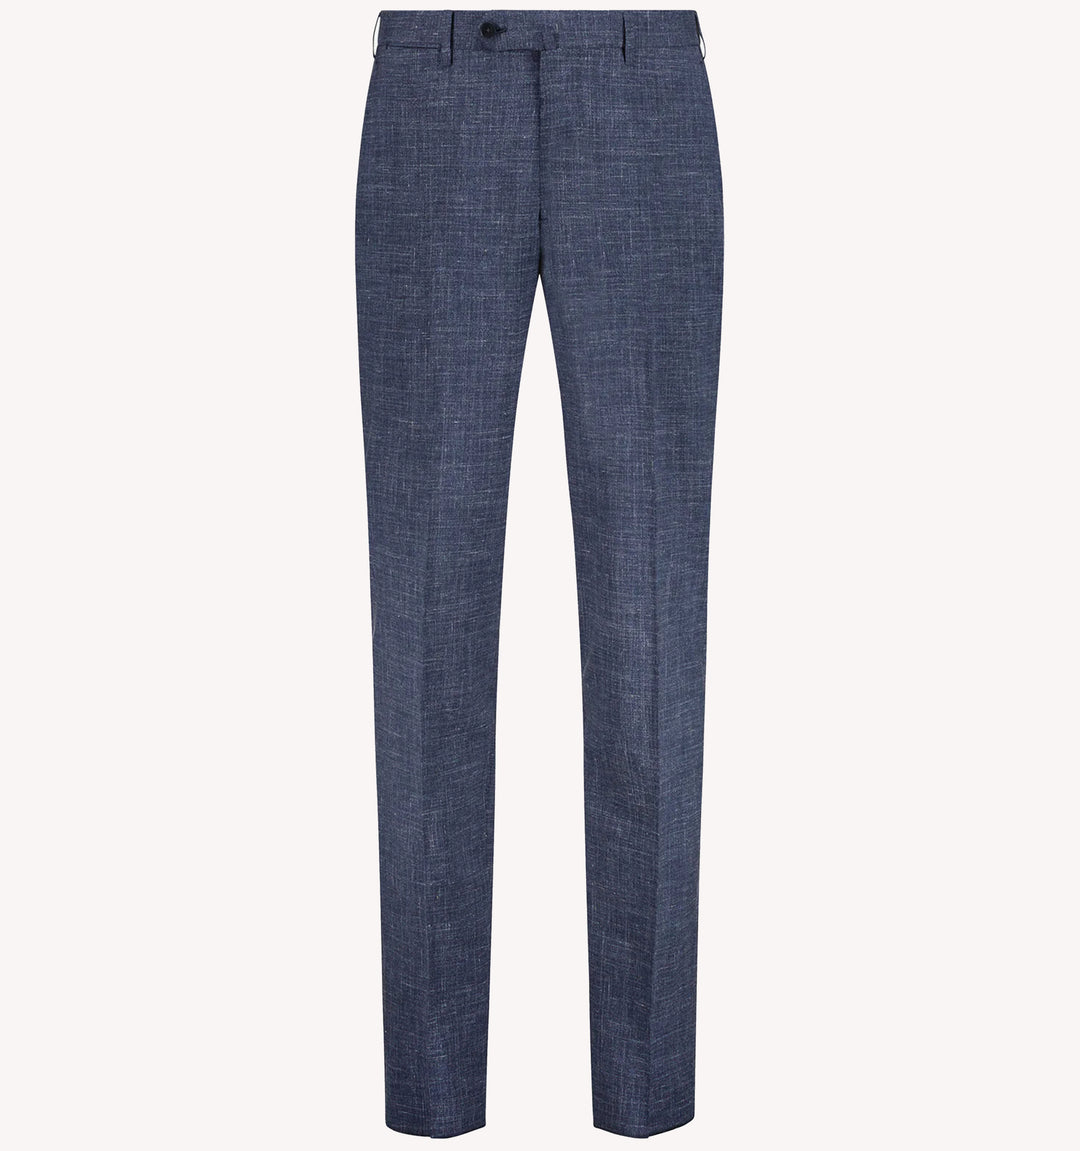 Isaia Dress Trousers in Navy Blue